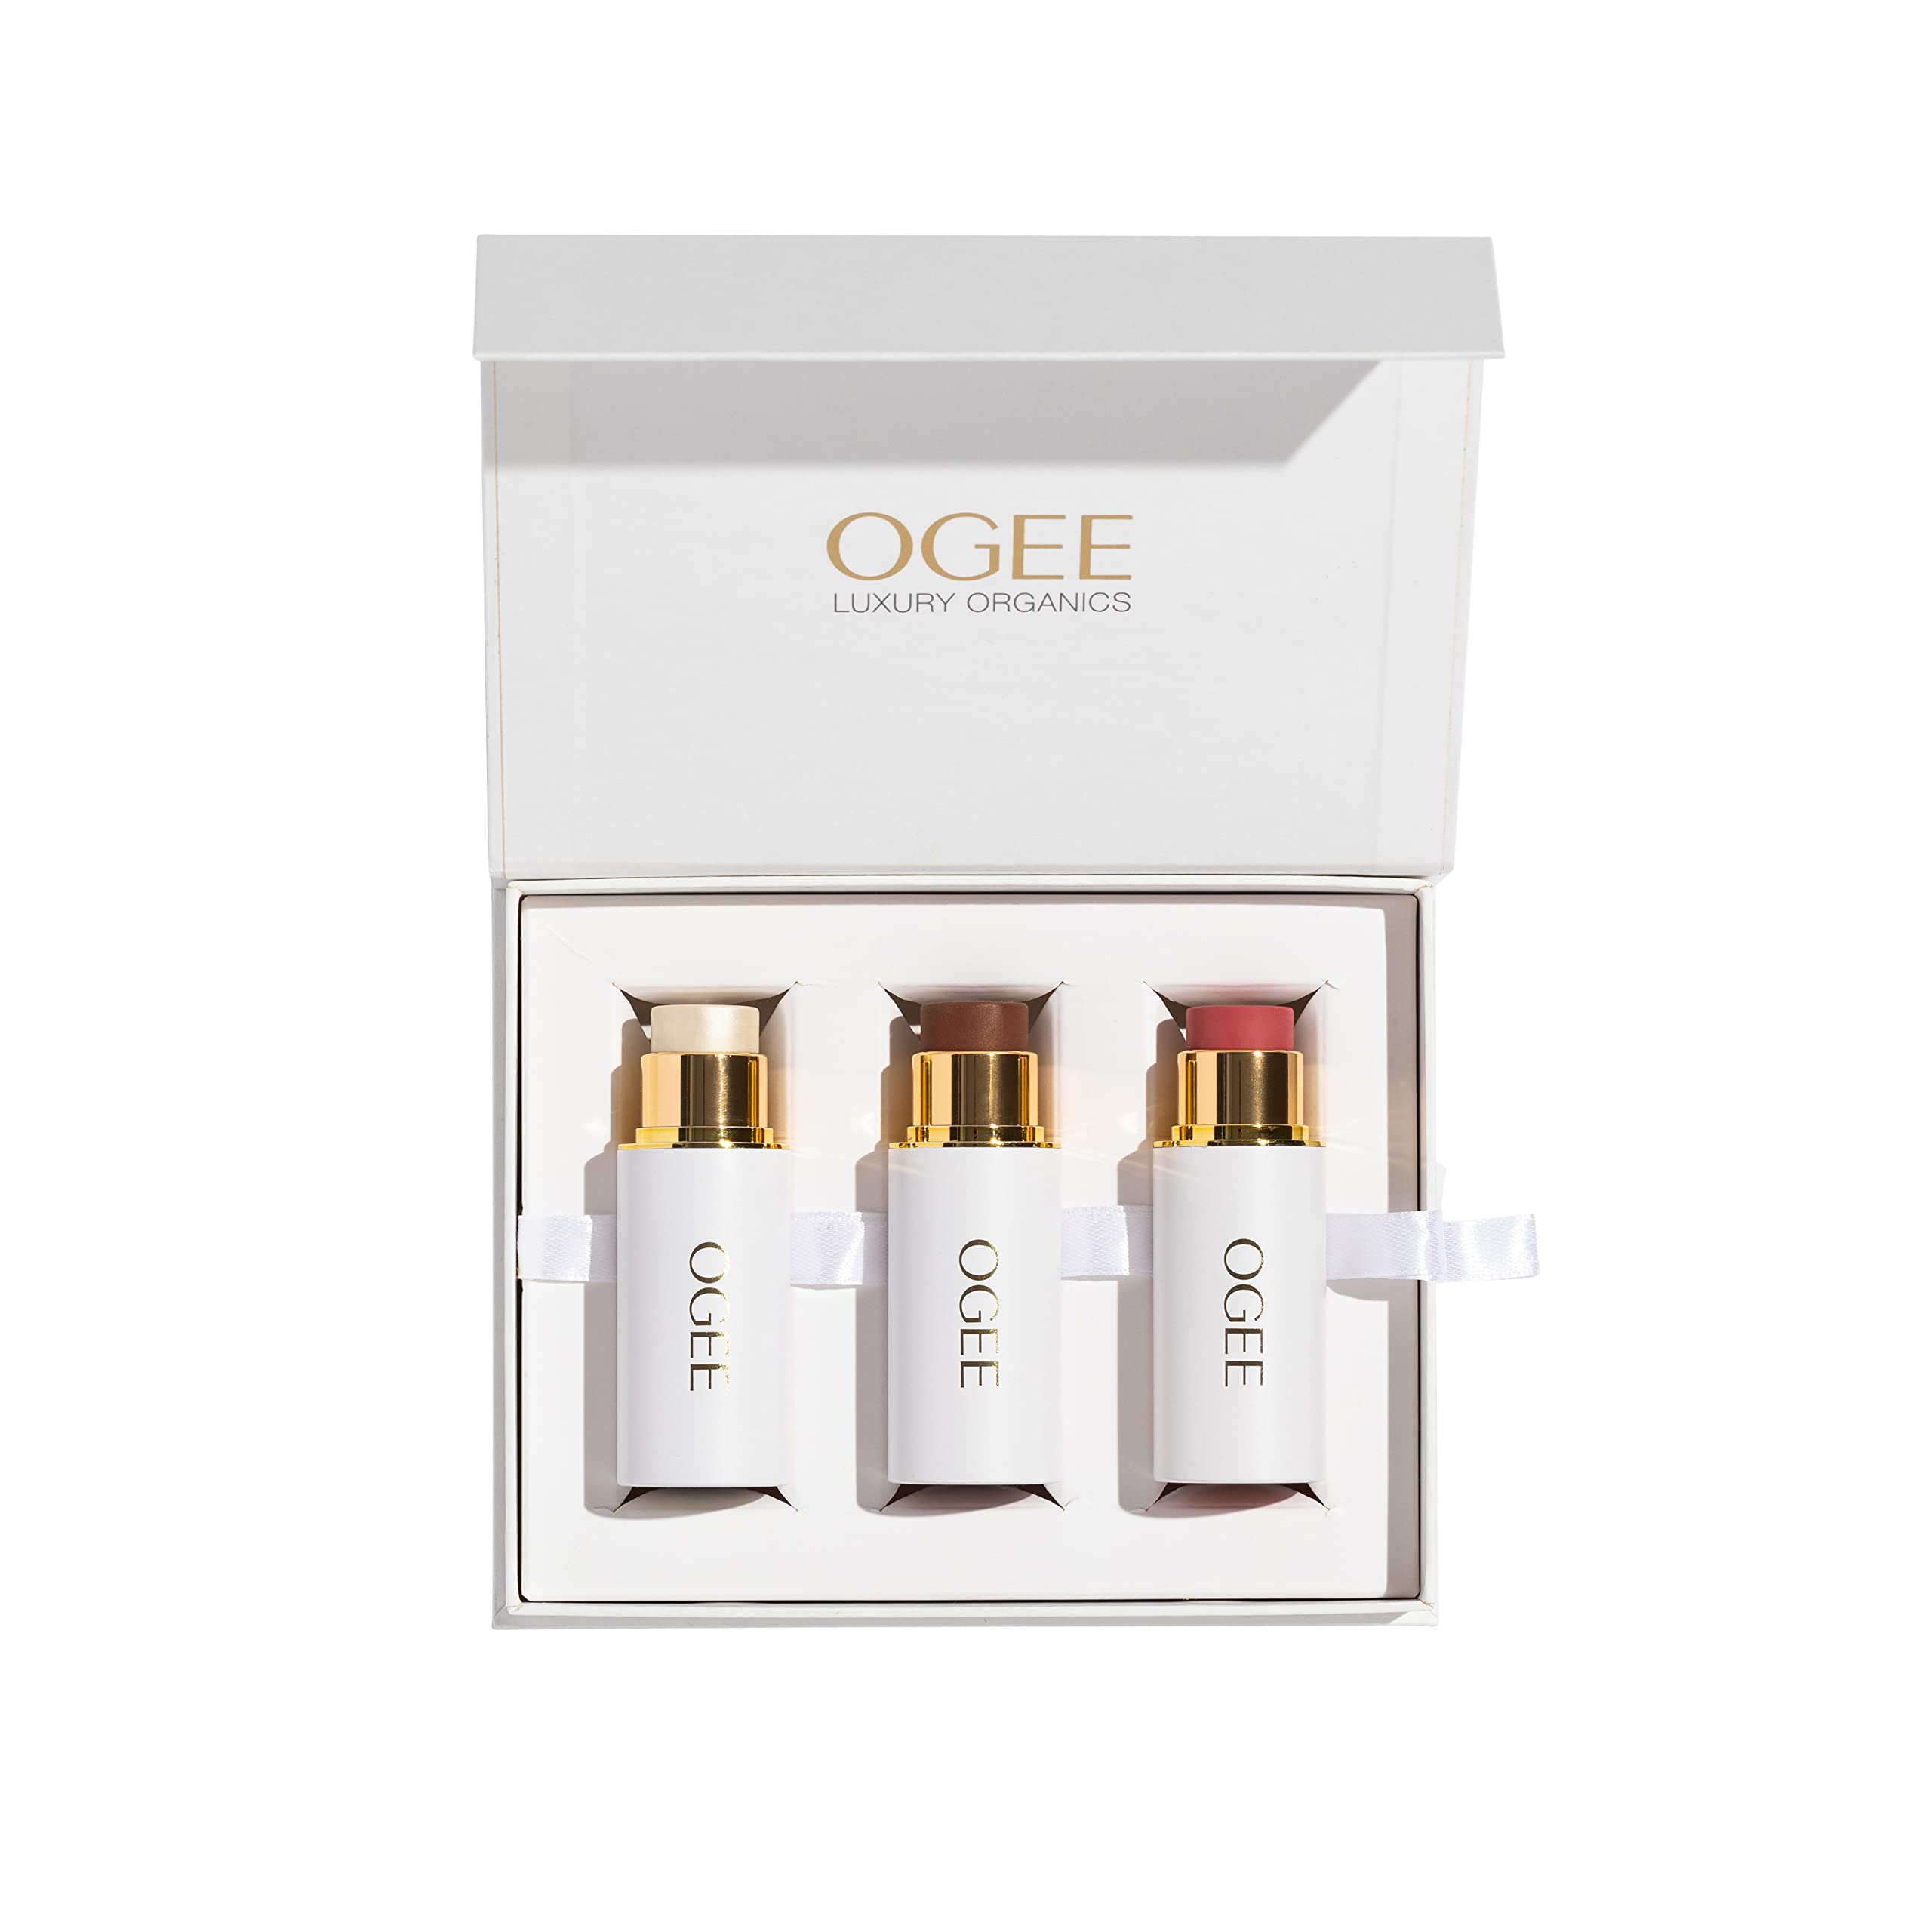 Ogee Face Stick Trio - Contour Stick Makeup Collection - Certified Organic Bronzer, Blush Stick, and Highlighter Stick for a Flawless Look